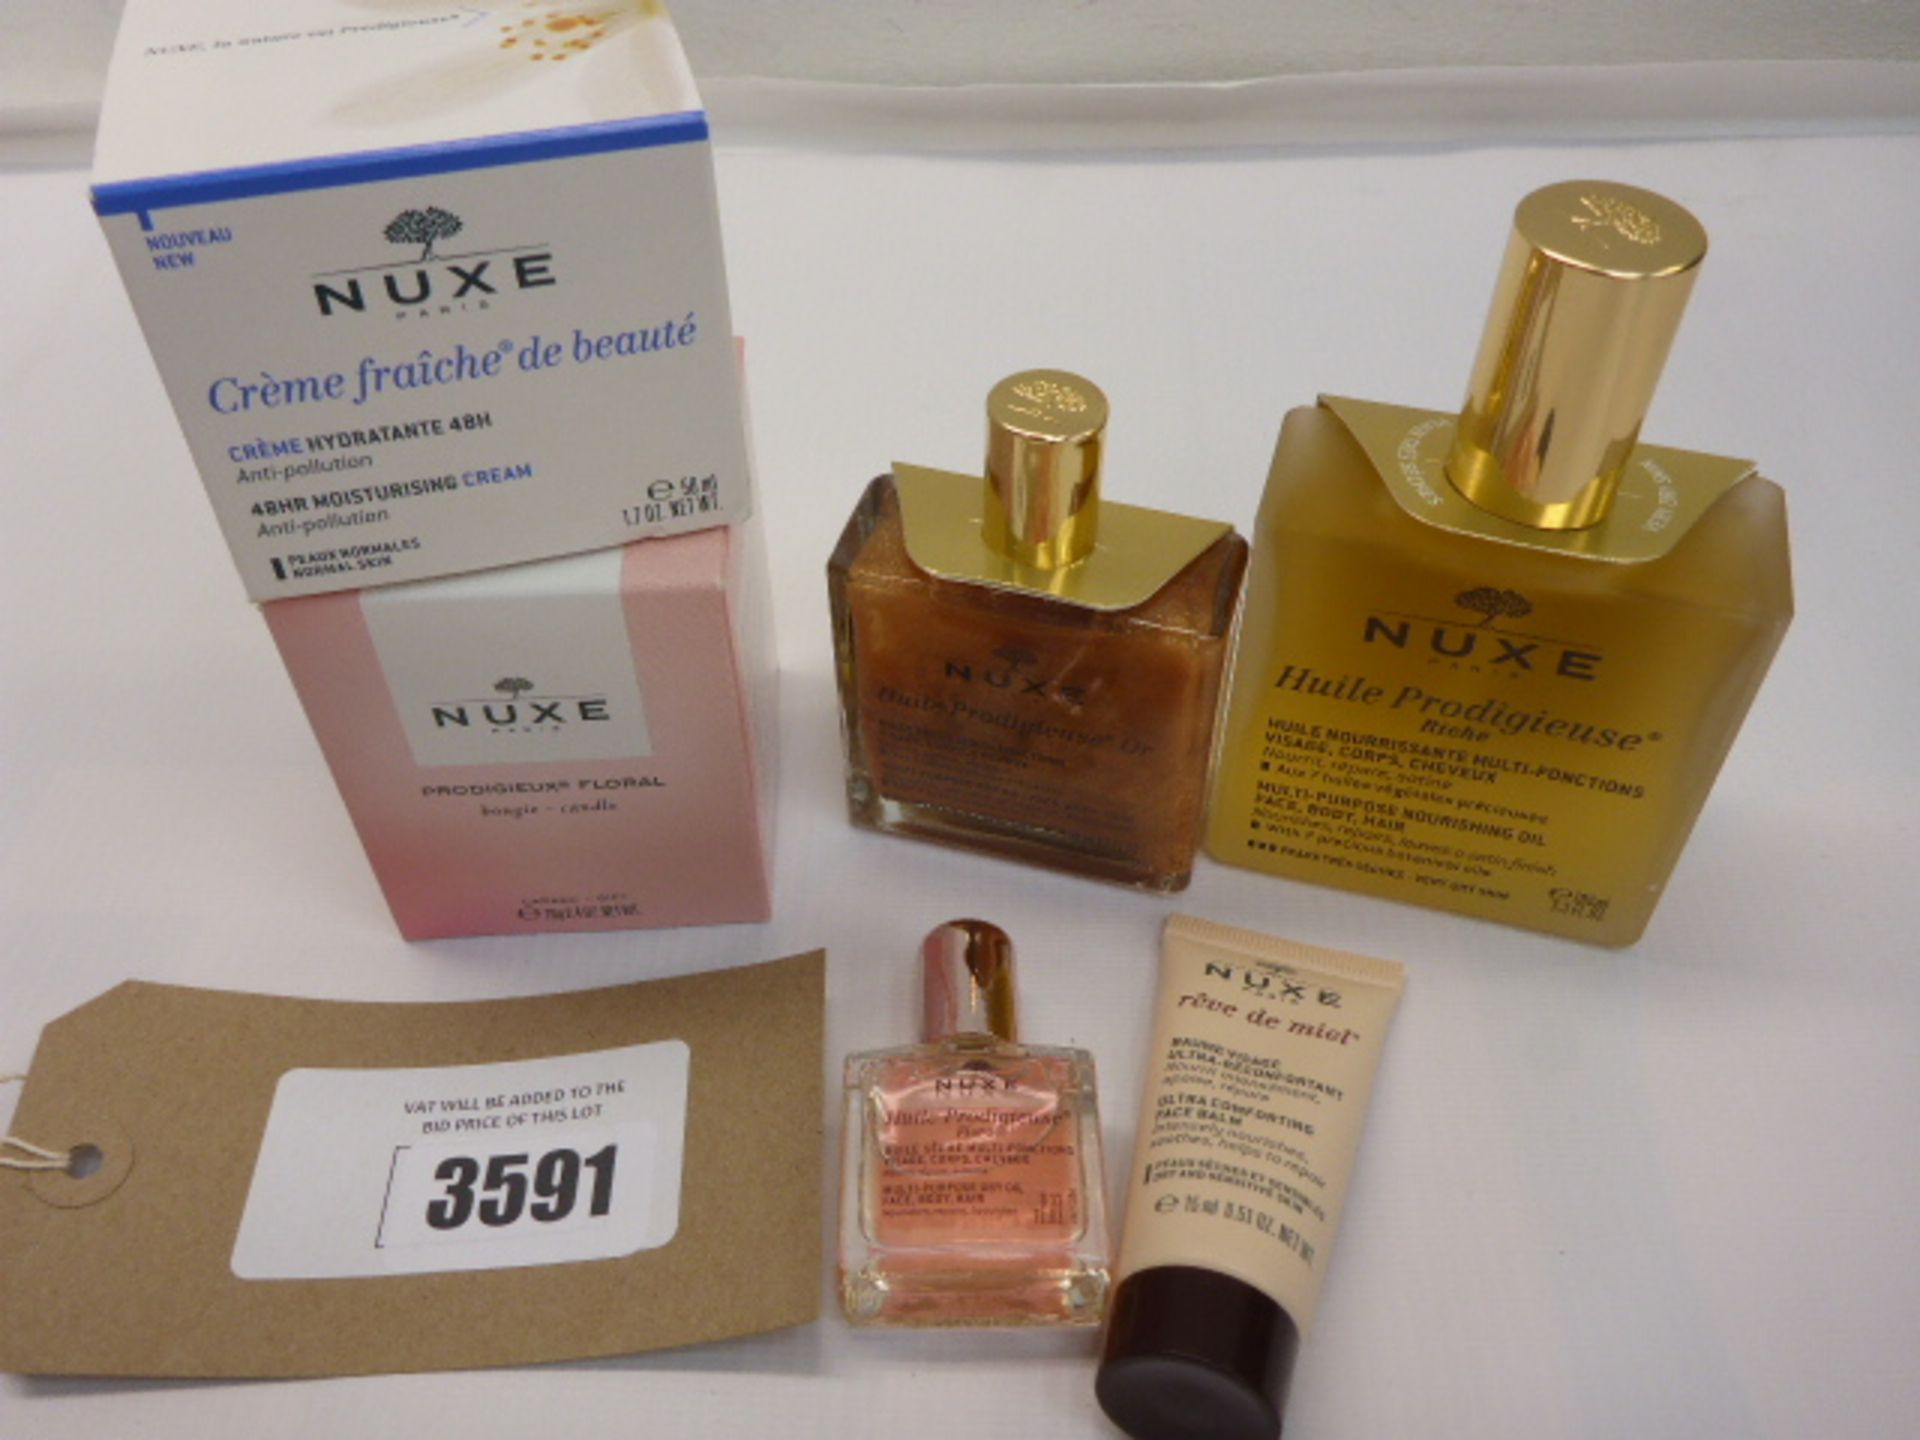 Selection of Nuxe beauty products including hydration cream, nourishing oil, balm etc